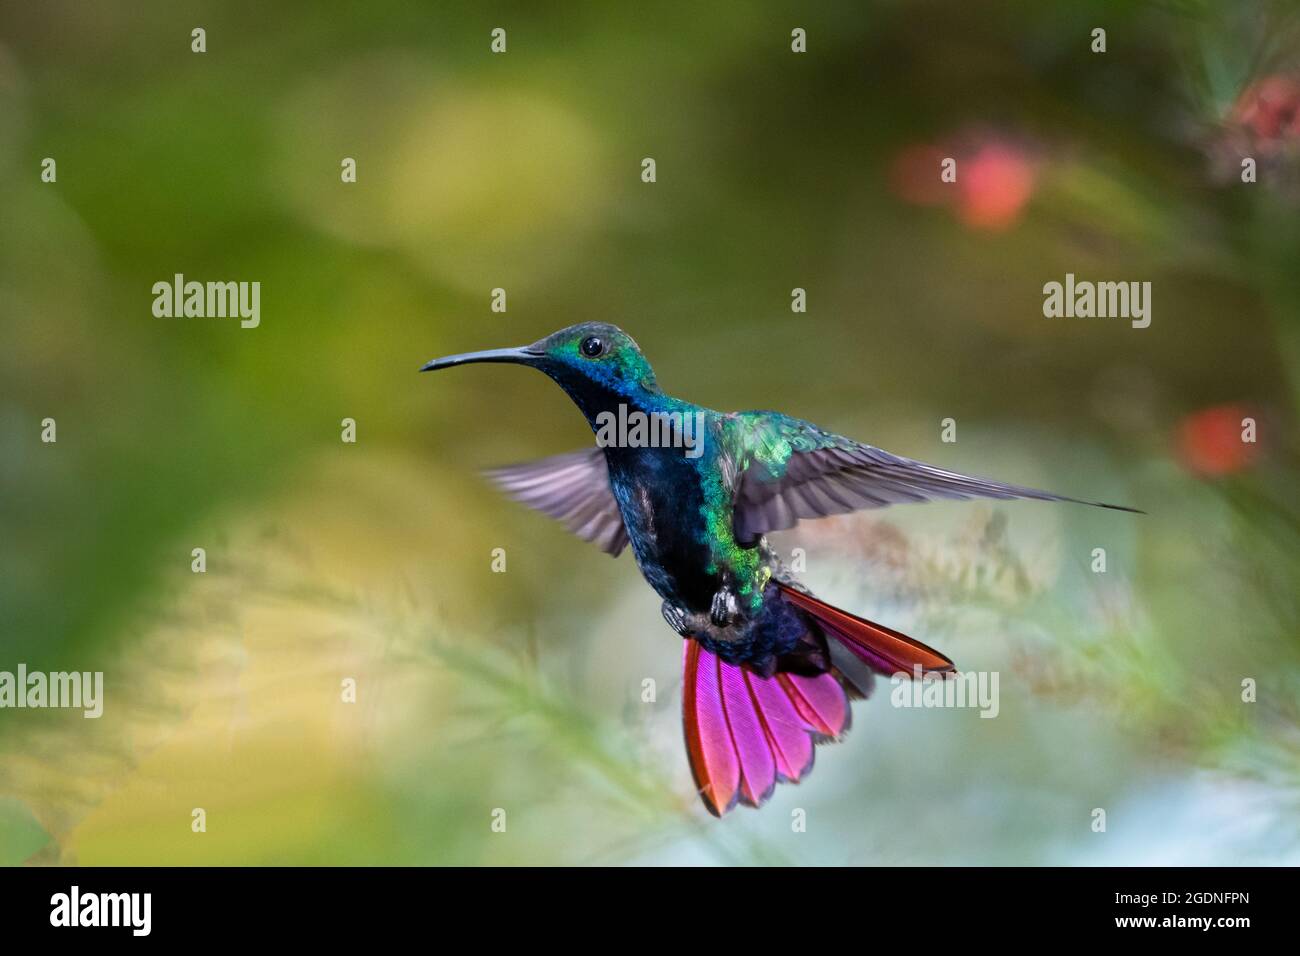 A Black-throated Mango hummingbird (Anthracothorax nigricollis) in flight with a colorful bokeh background. Tropical bird in wild. Stock Photo